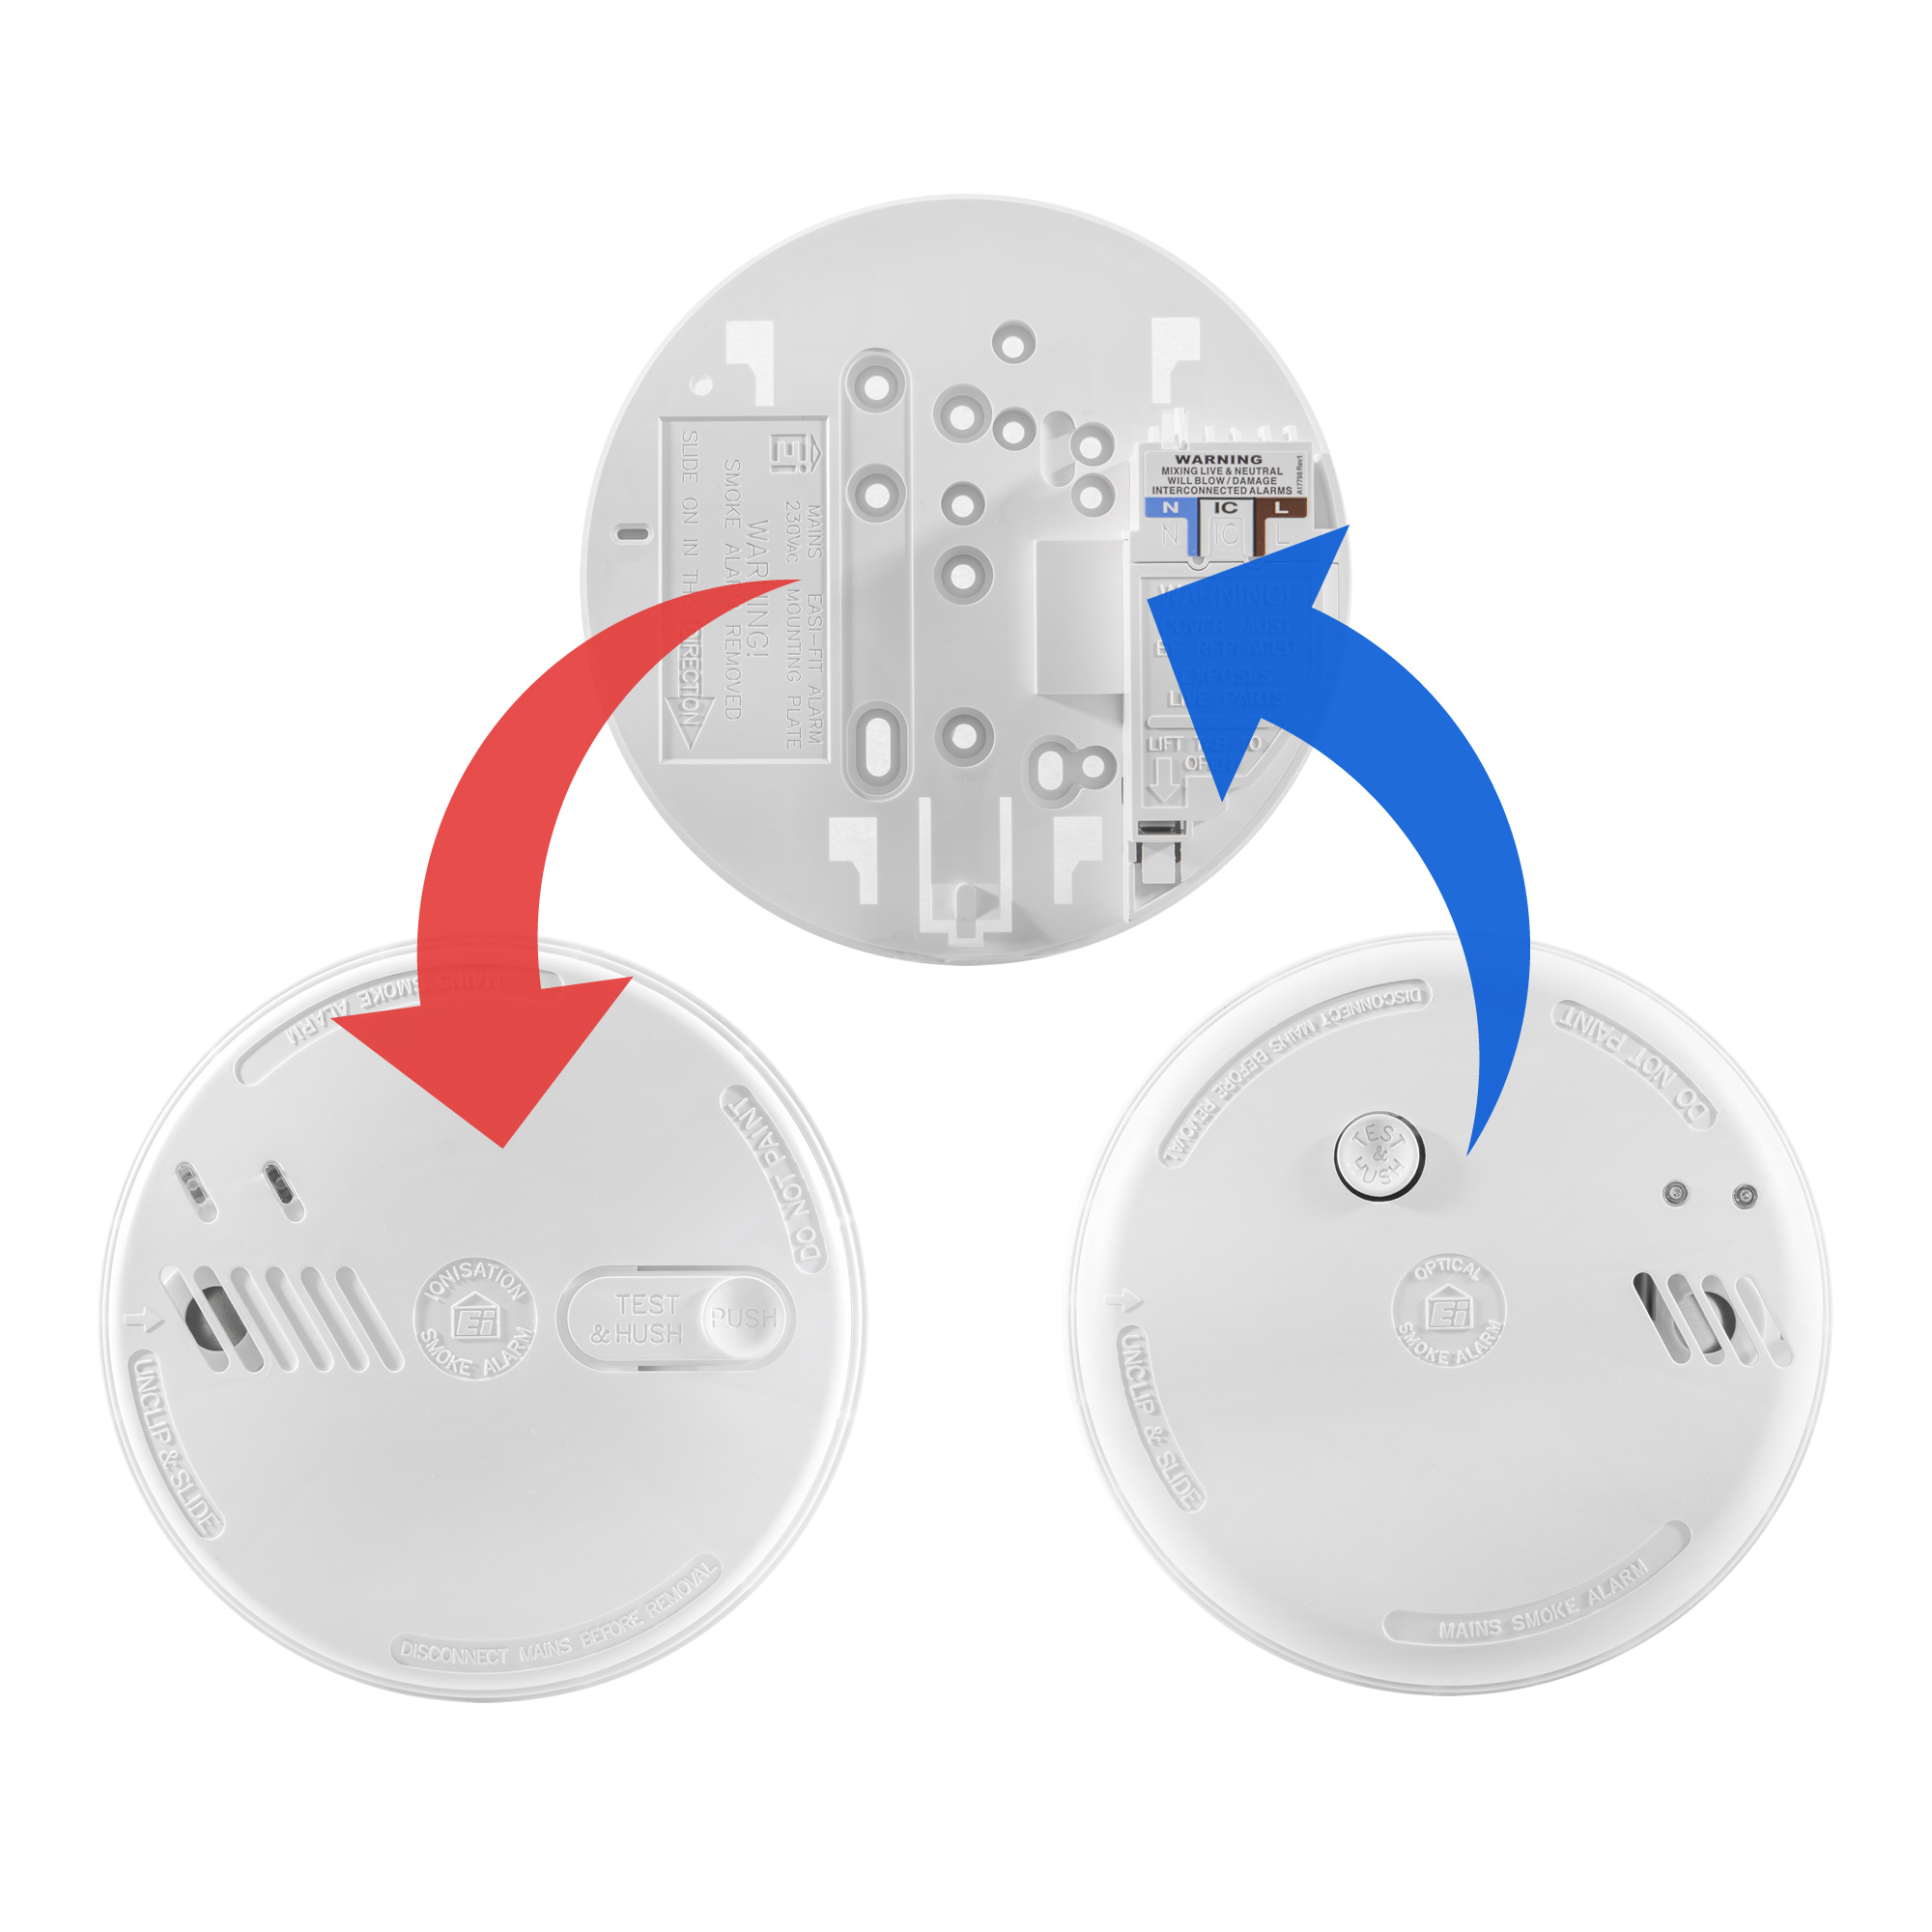 Replacement for Ei141 and Ei141RC Smoke Alarms